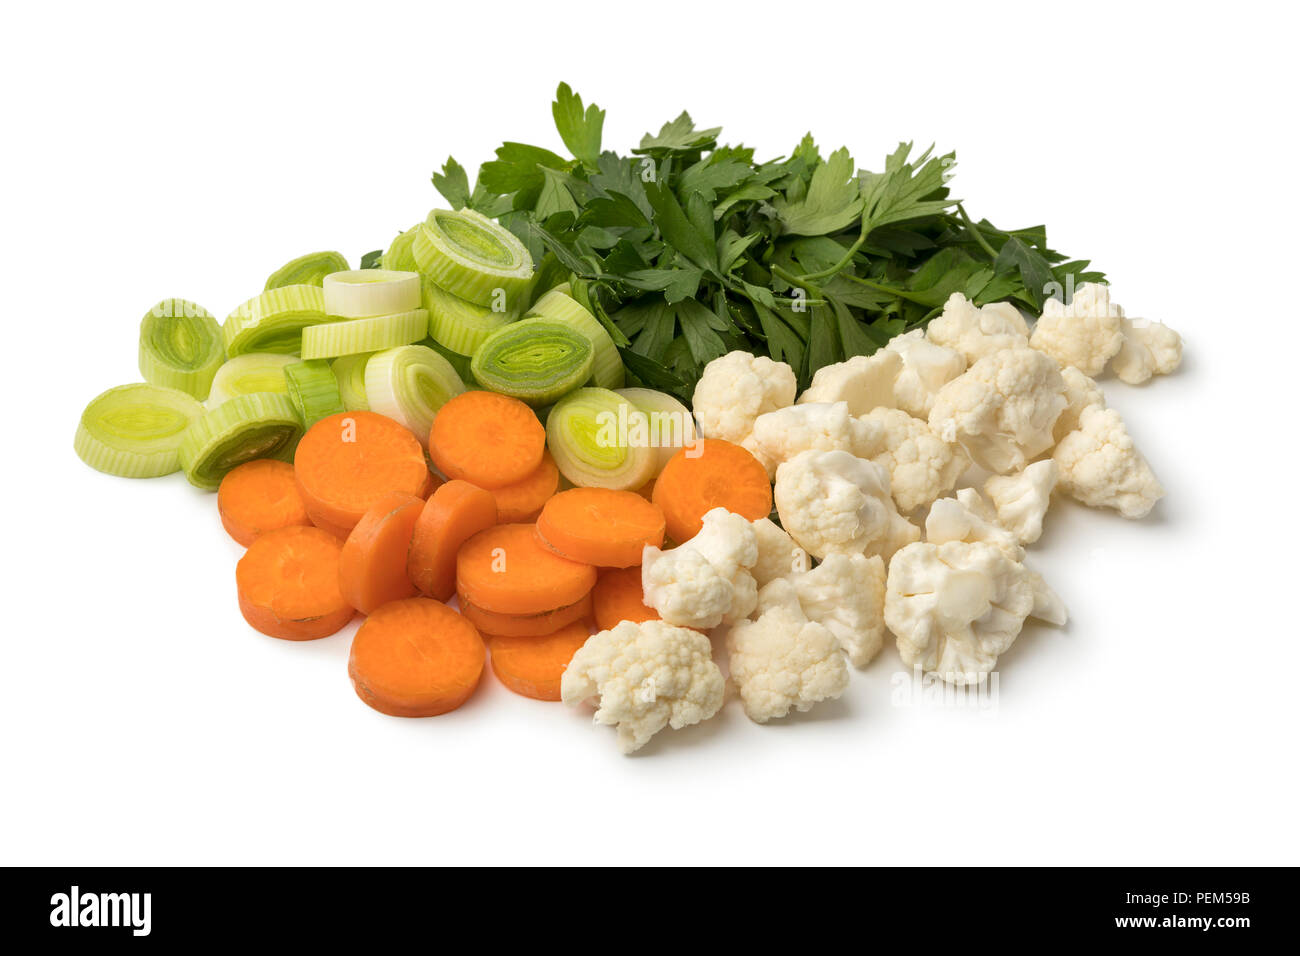 Heap of fresh cut organic vegetables isolated on white background